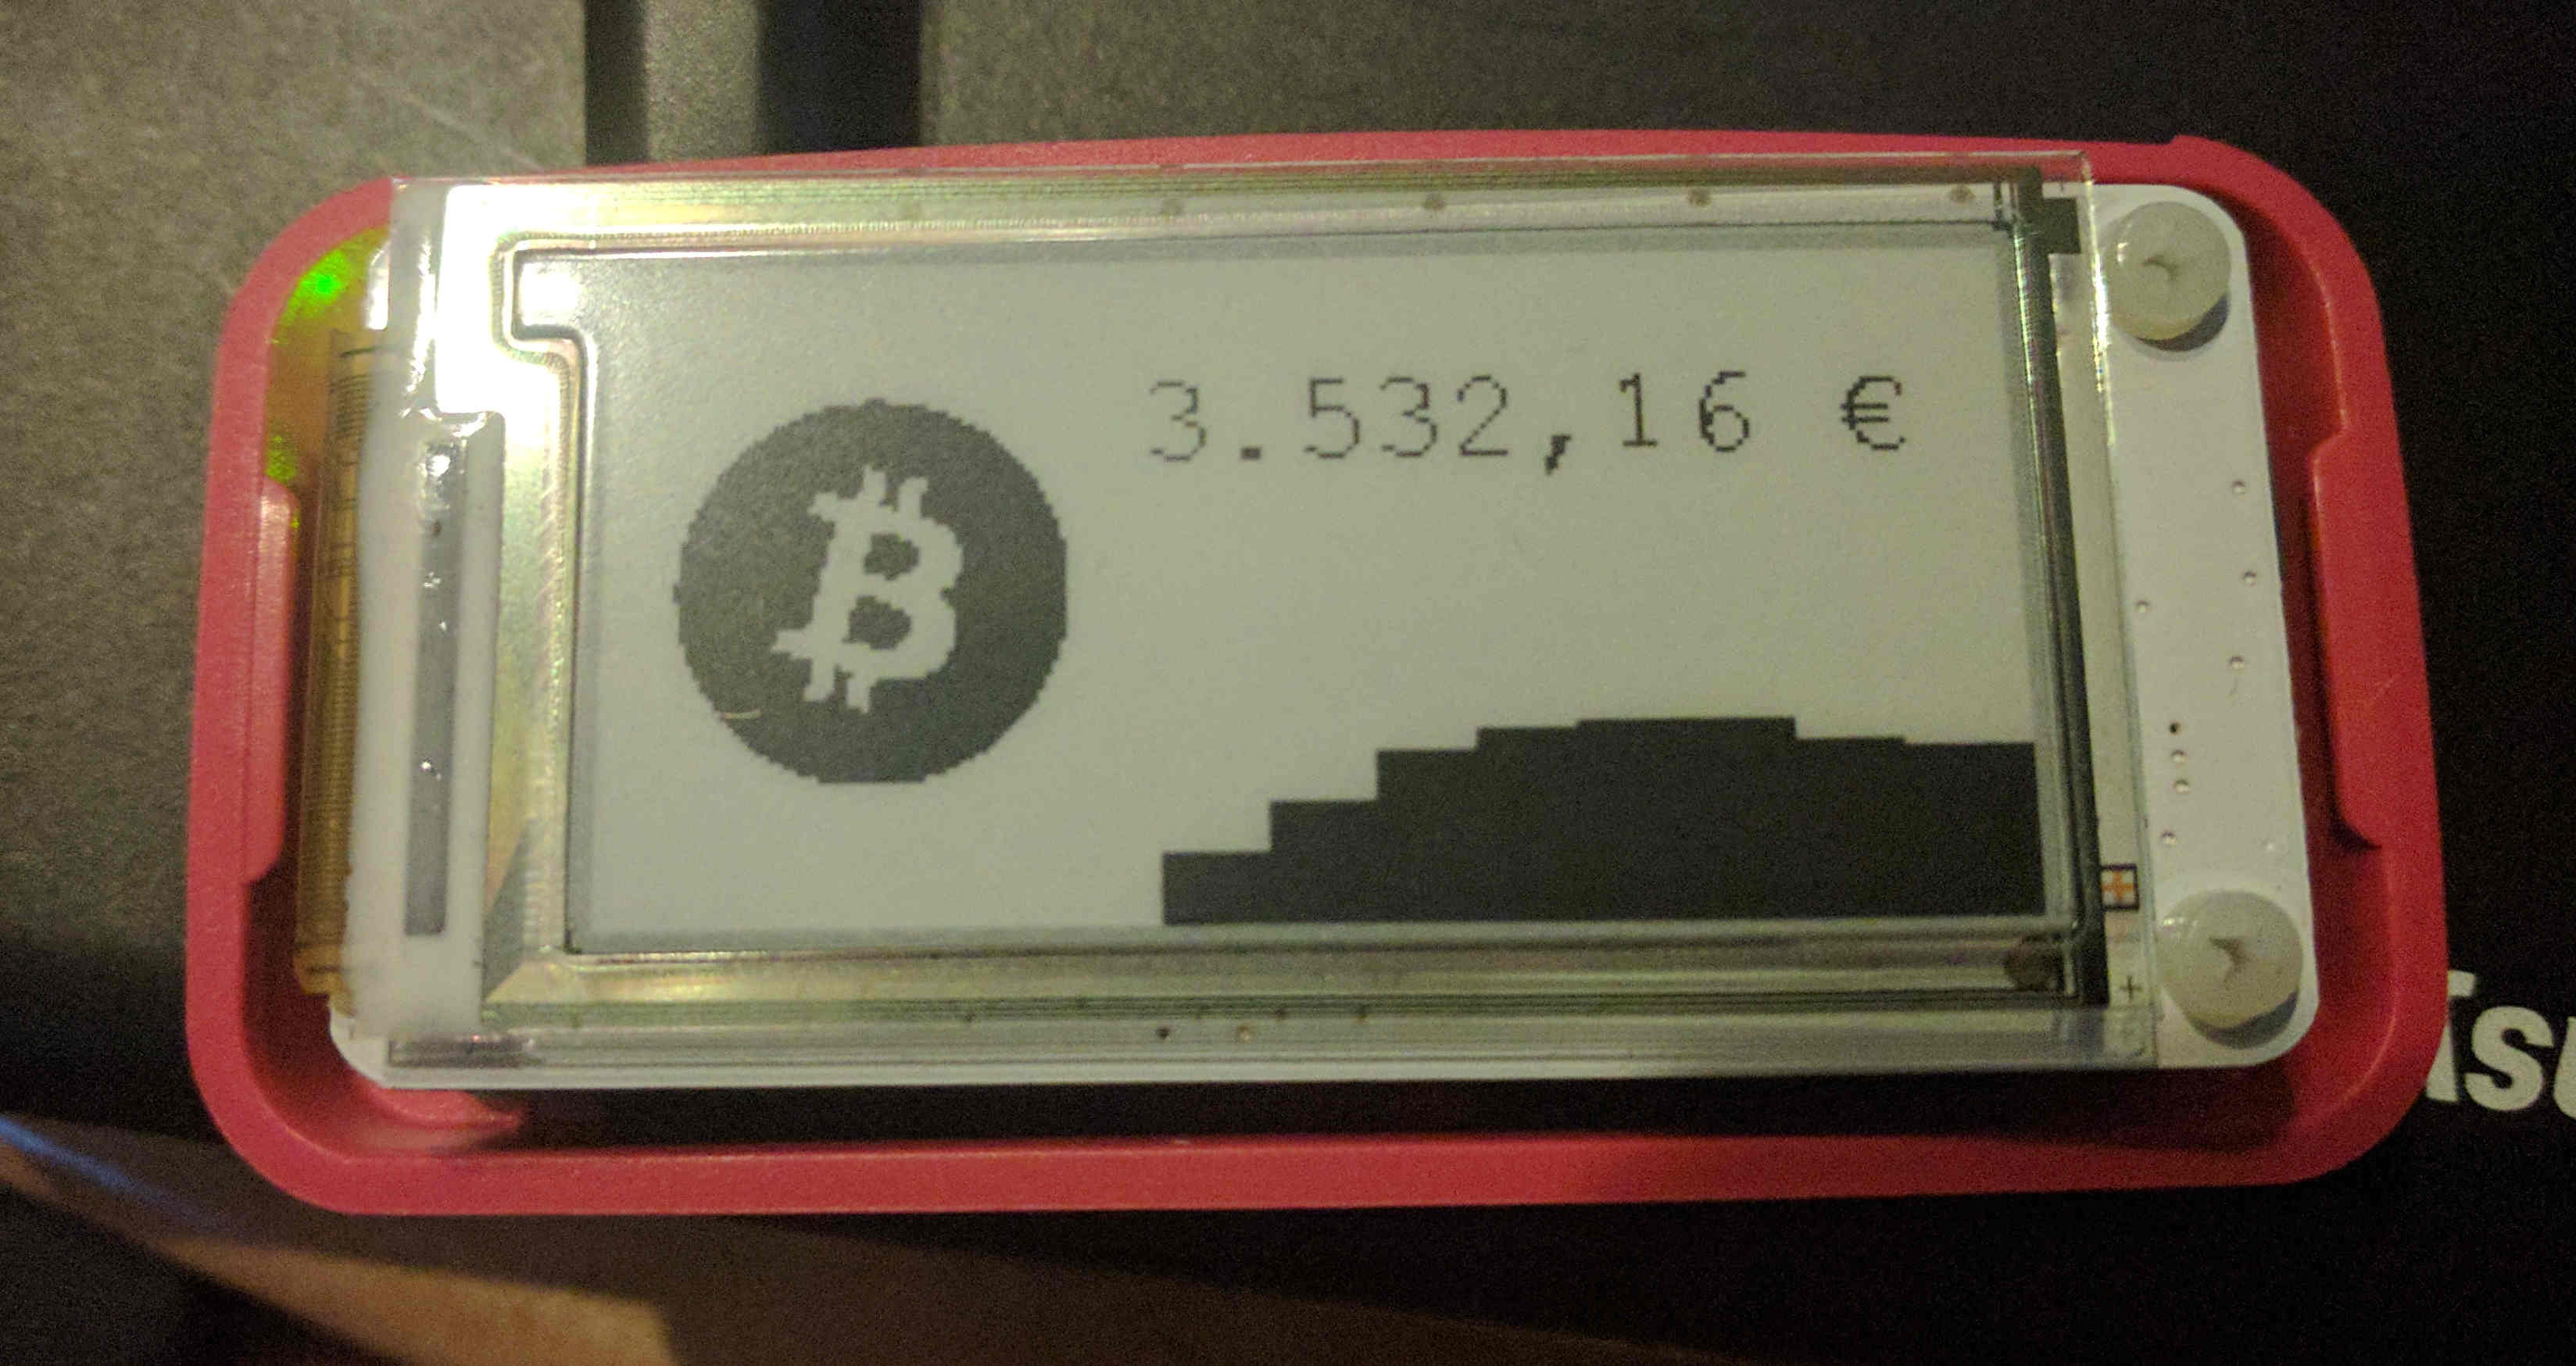 Build a Cryptocurrency Price Ticker Using a Raspberry Pi